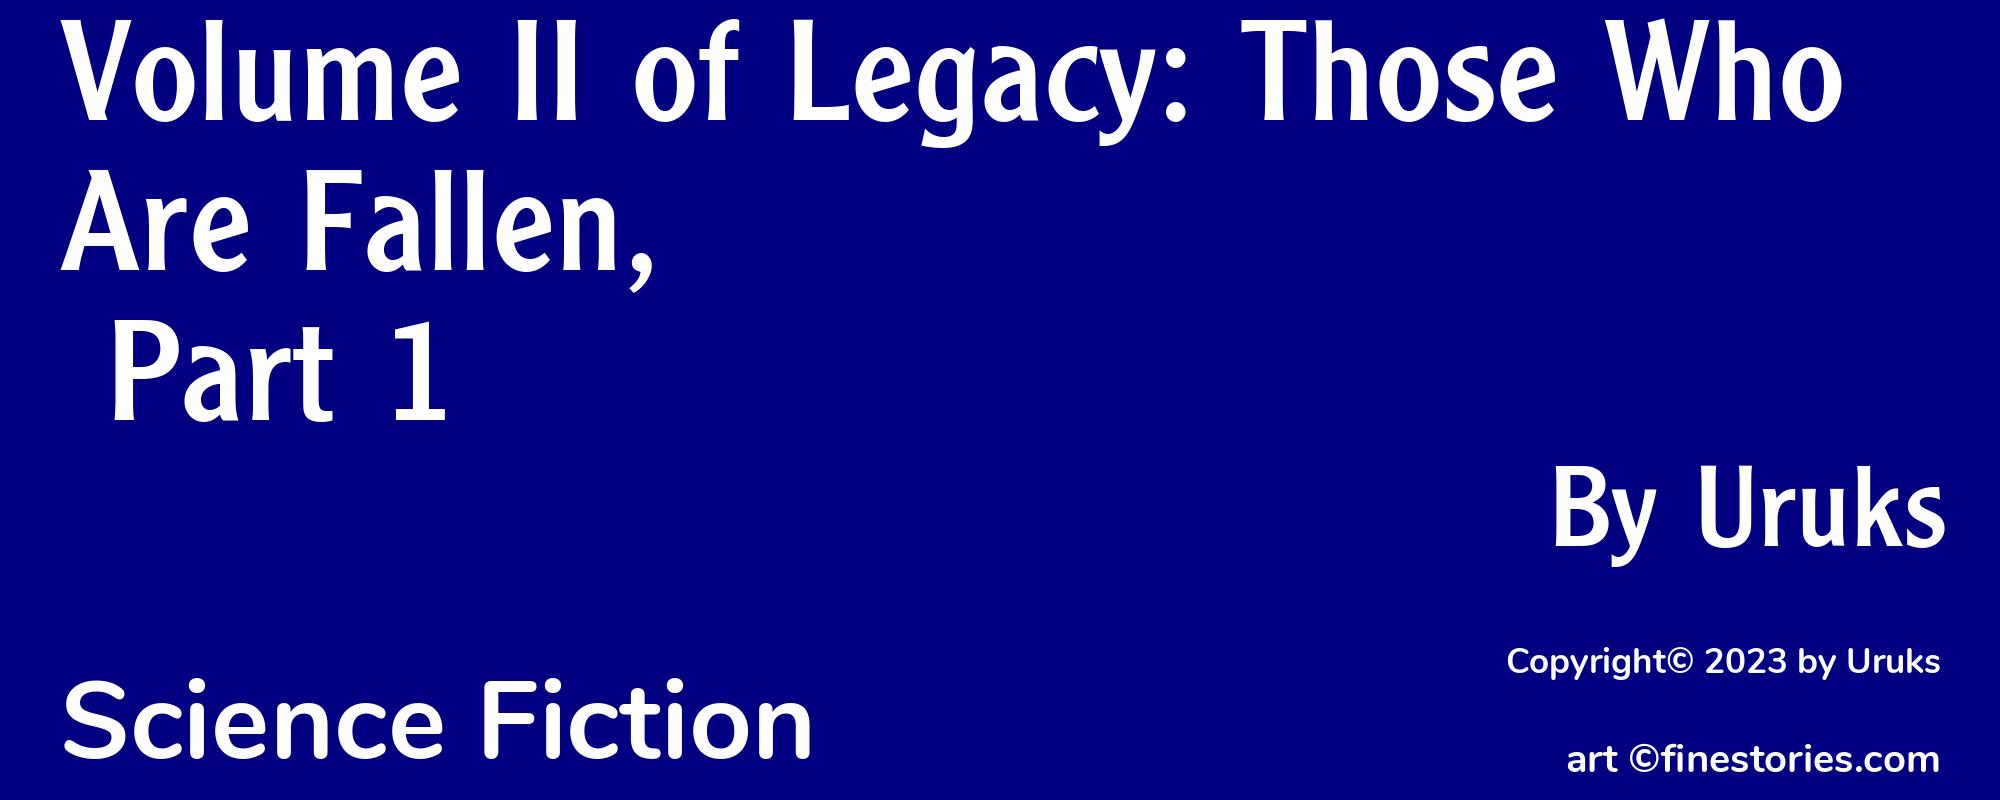 Volume II of Legacy: Those Who Are Fallen, Part 1 - Cover